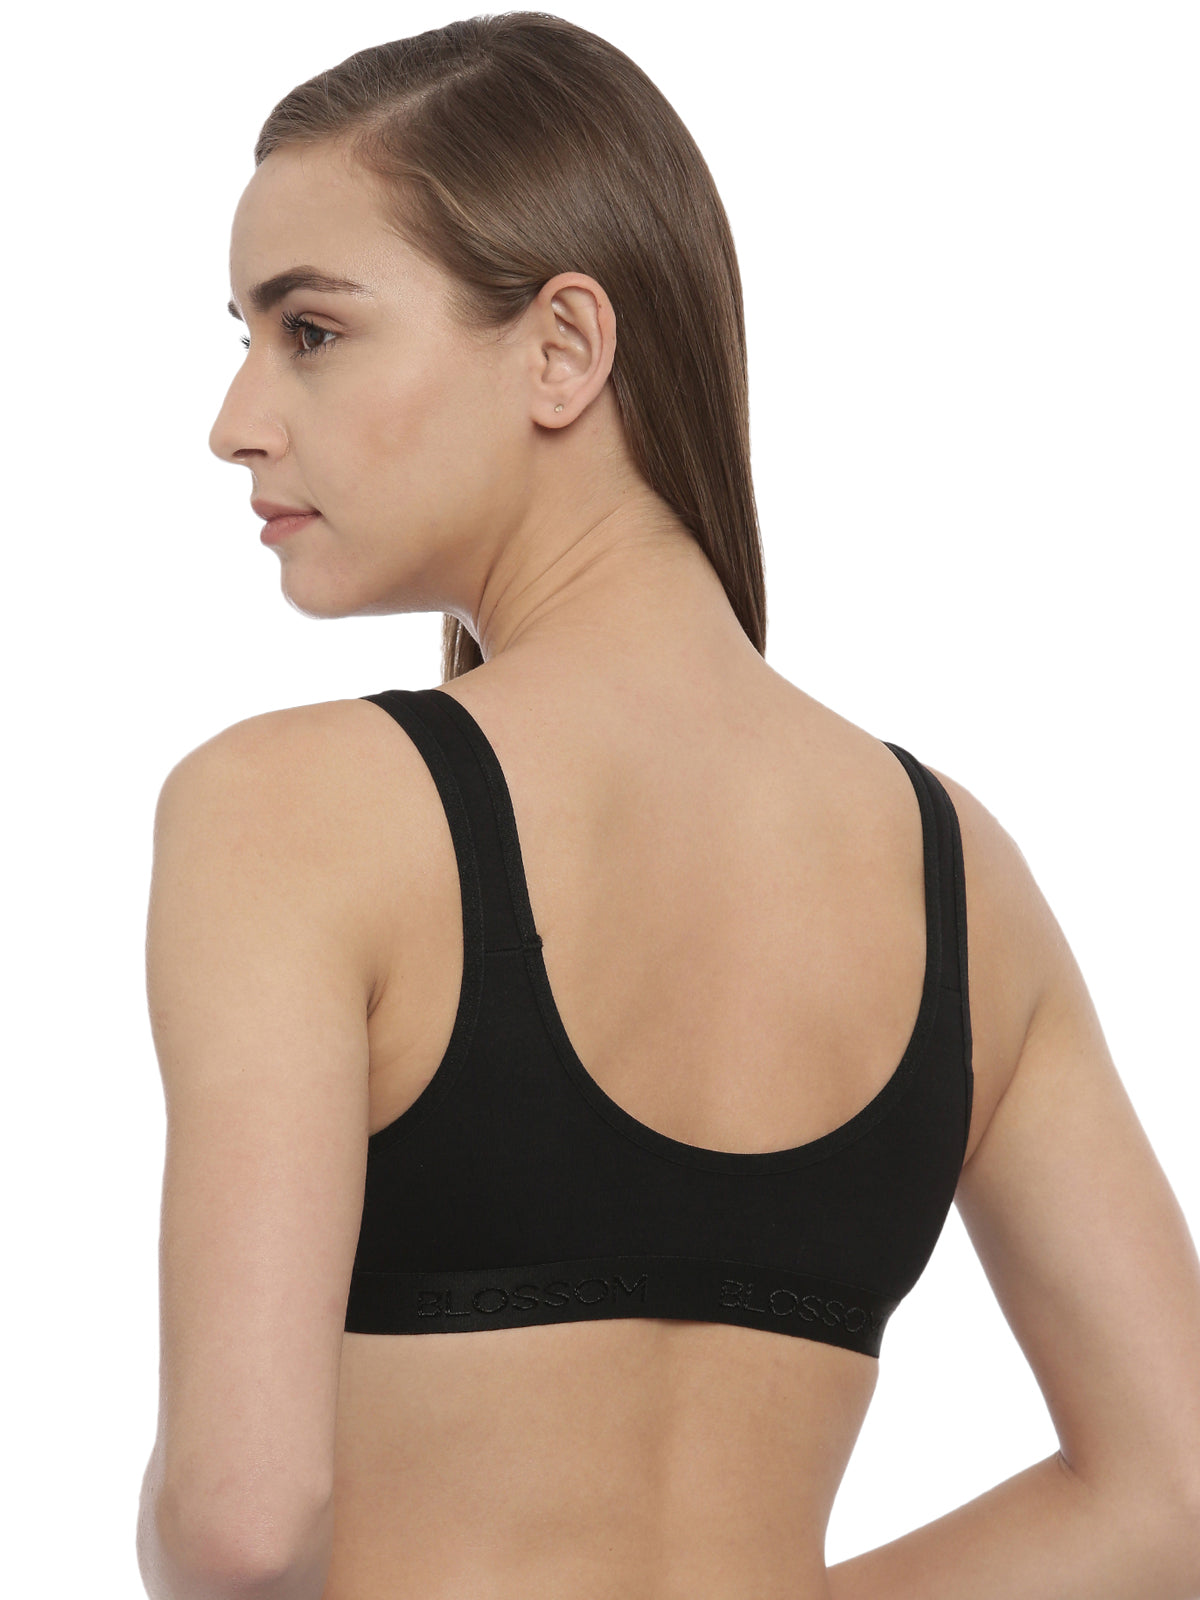 blossom-sporty bra-Pack of 2-black3-Sports collection-utility based bra